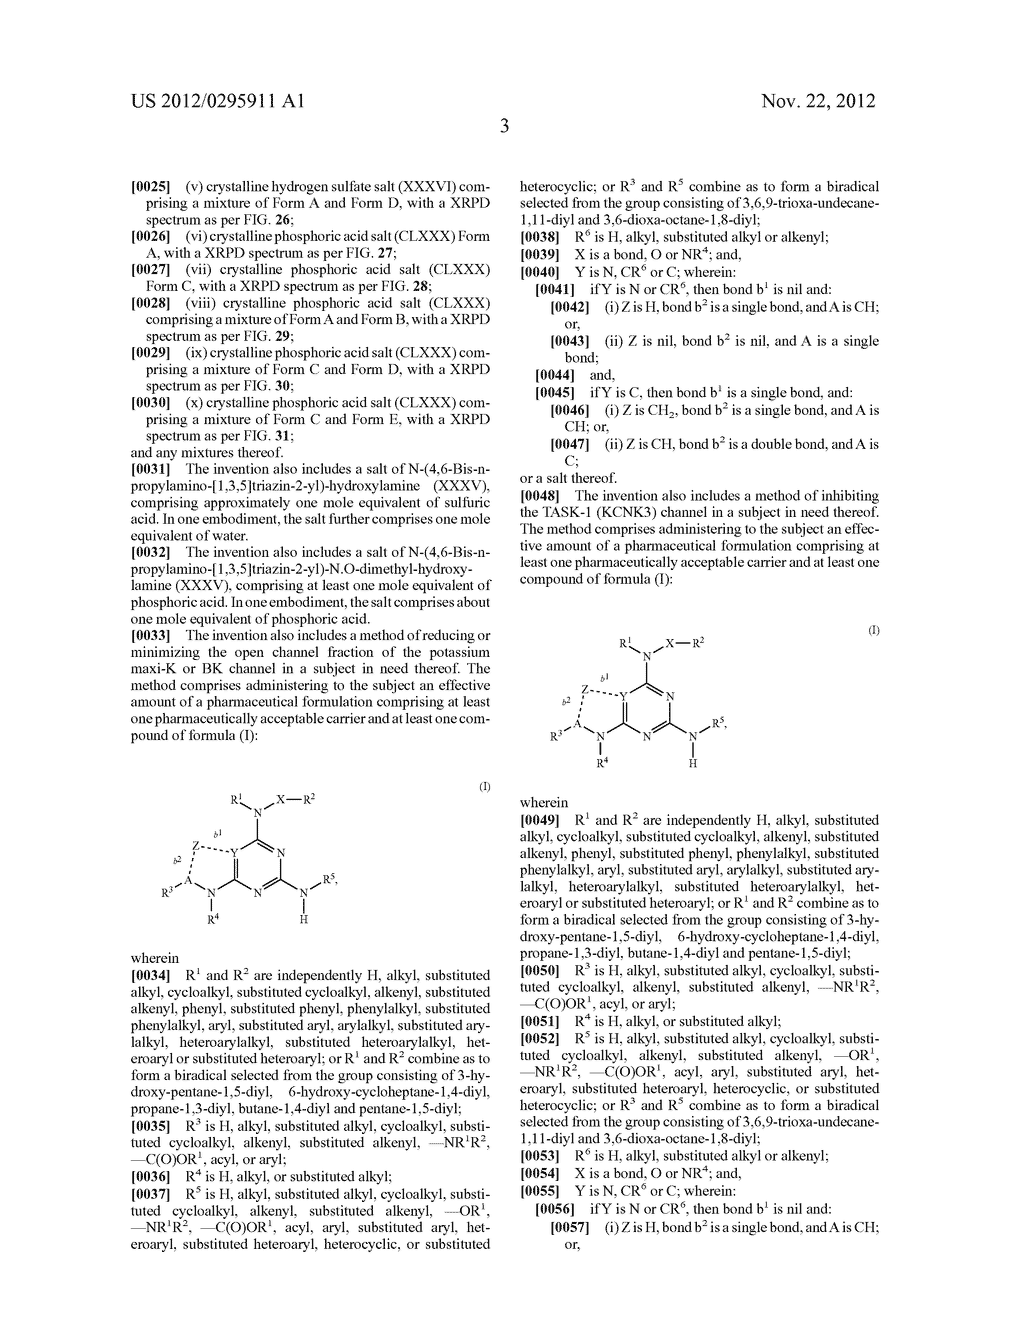 Novel Compounds and Compositions for Treatment of Breathing Control     Disorders or Diseases - diagram, schematic, and image 50